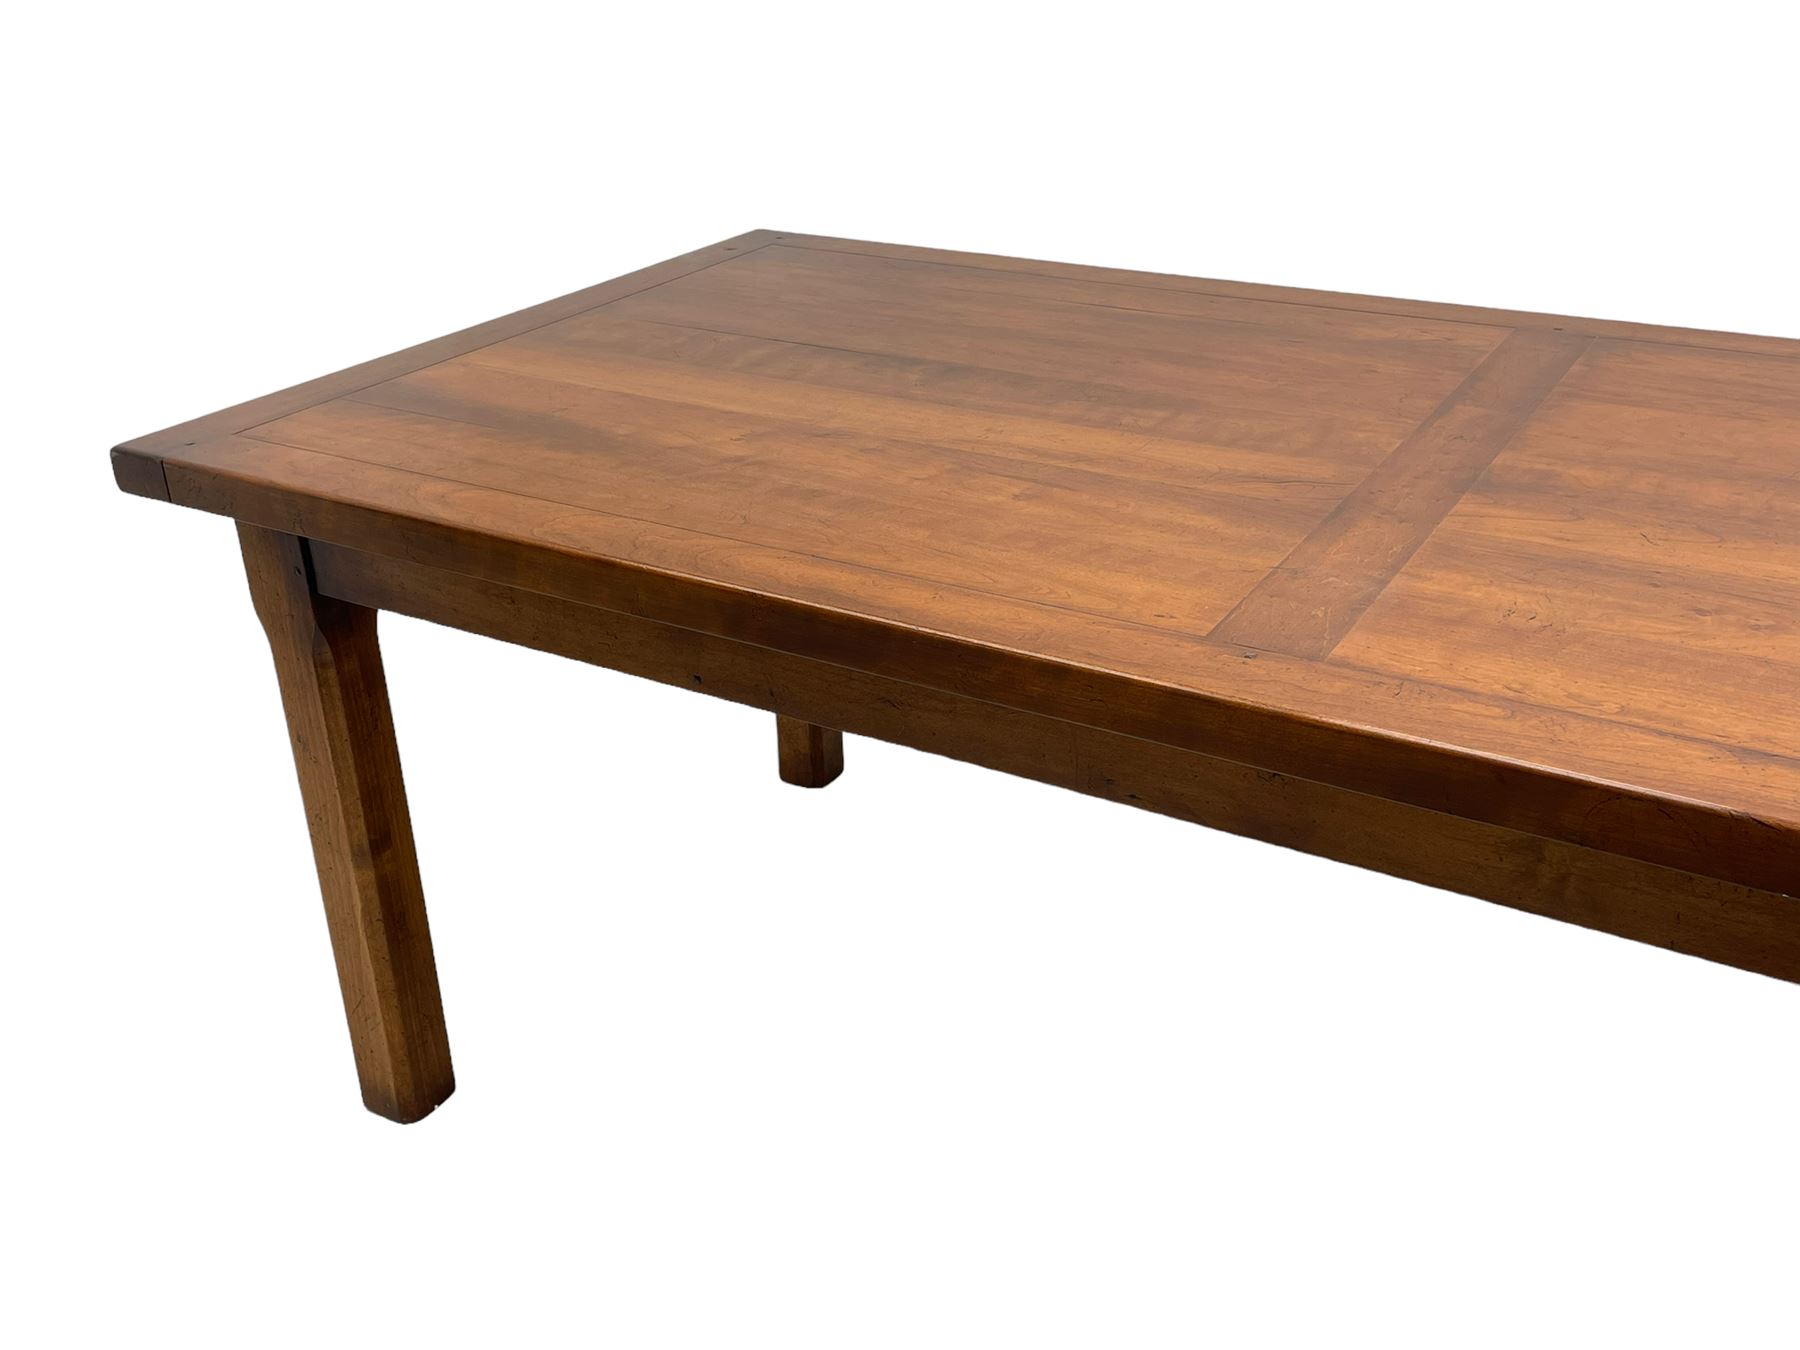 Contemporary French farmhouse design cherry wood dining table - Image 10 of 10